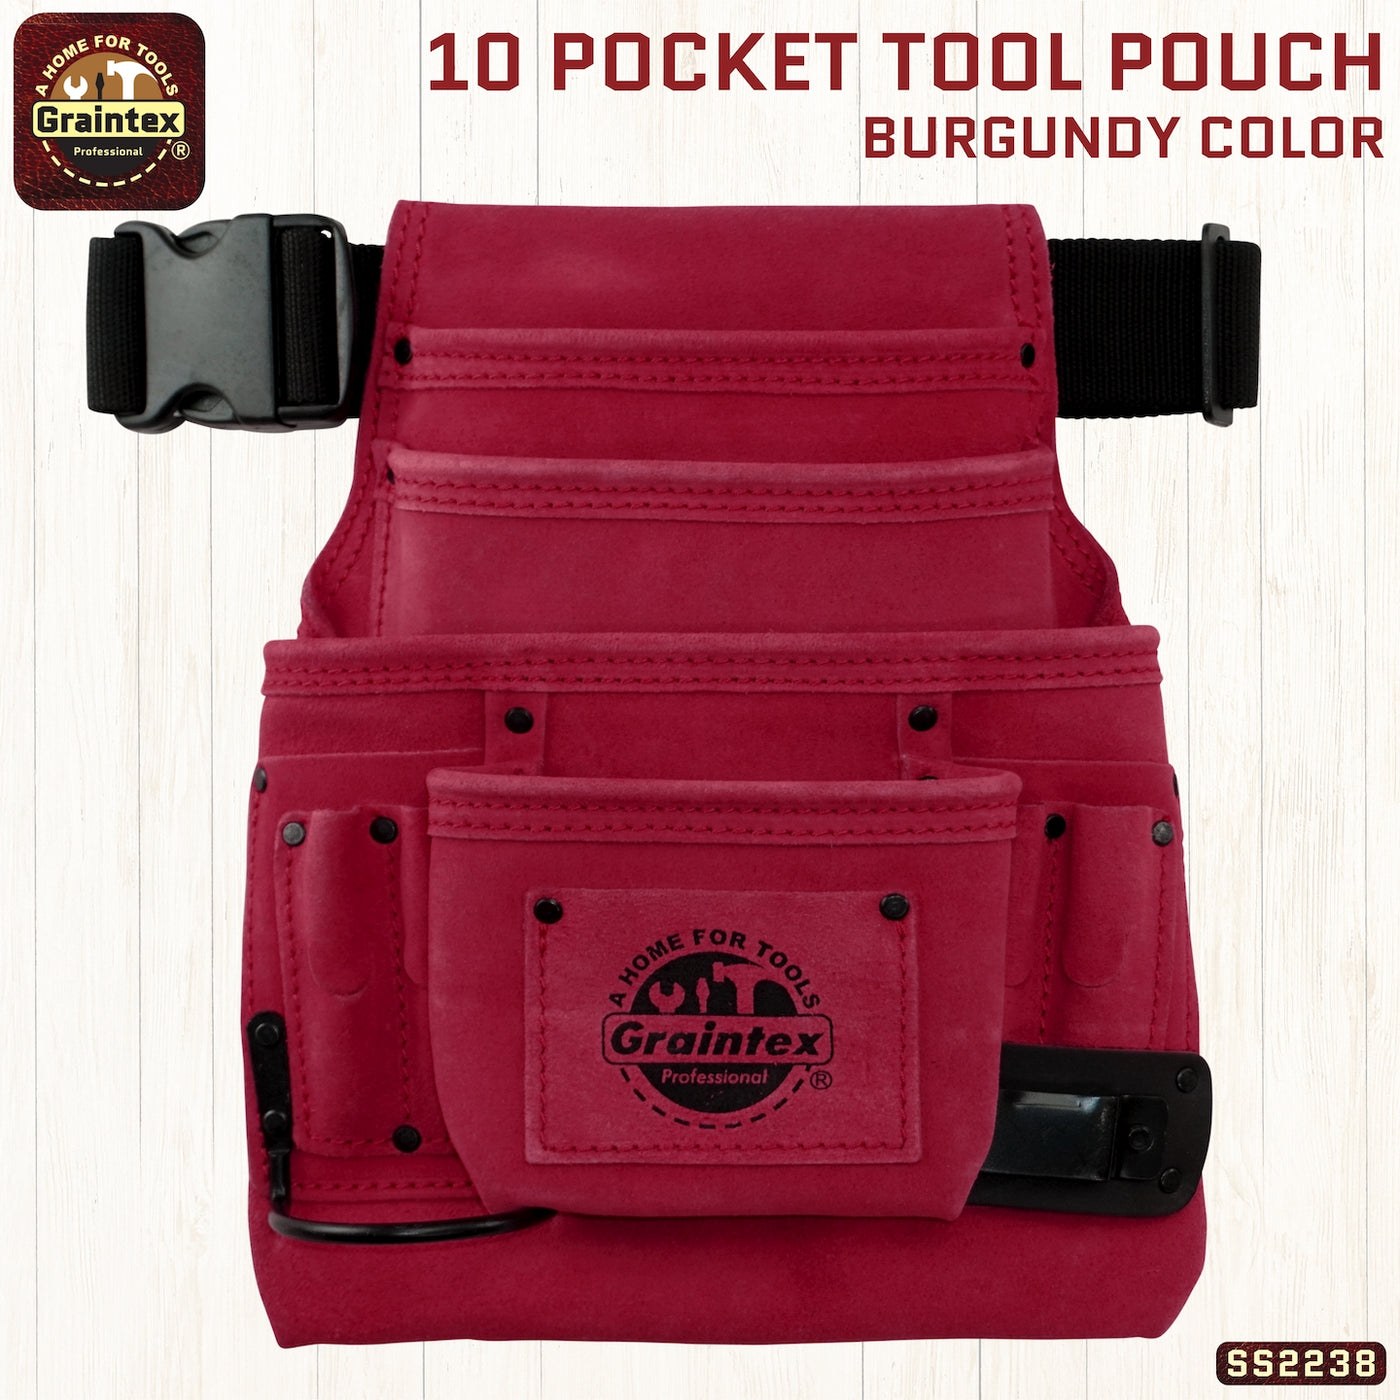 SS2238 :: 10 Pocket Nail & Tool Pouch Burgundy Color Suede Leather with Belt